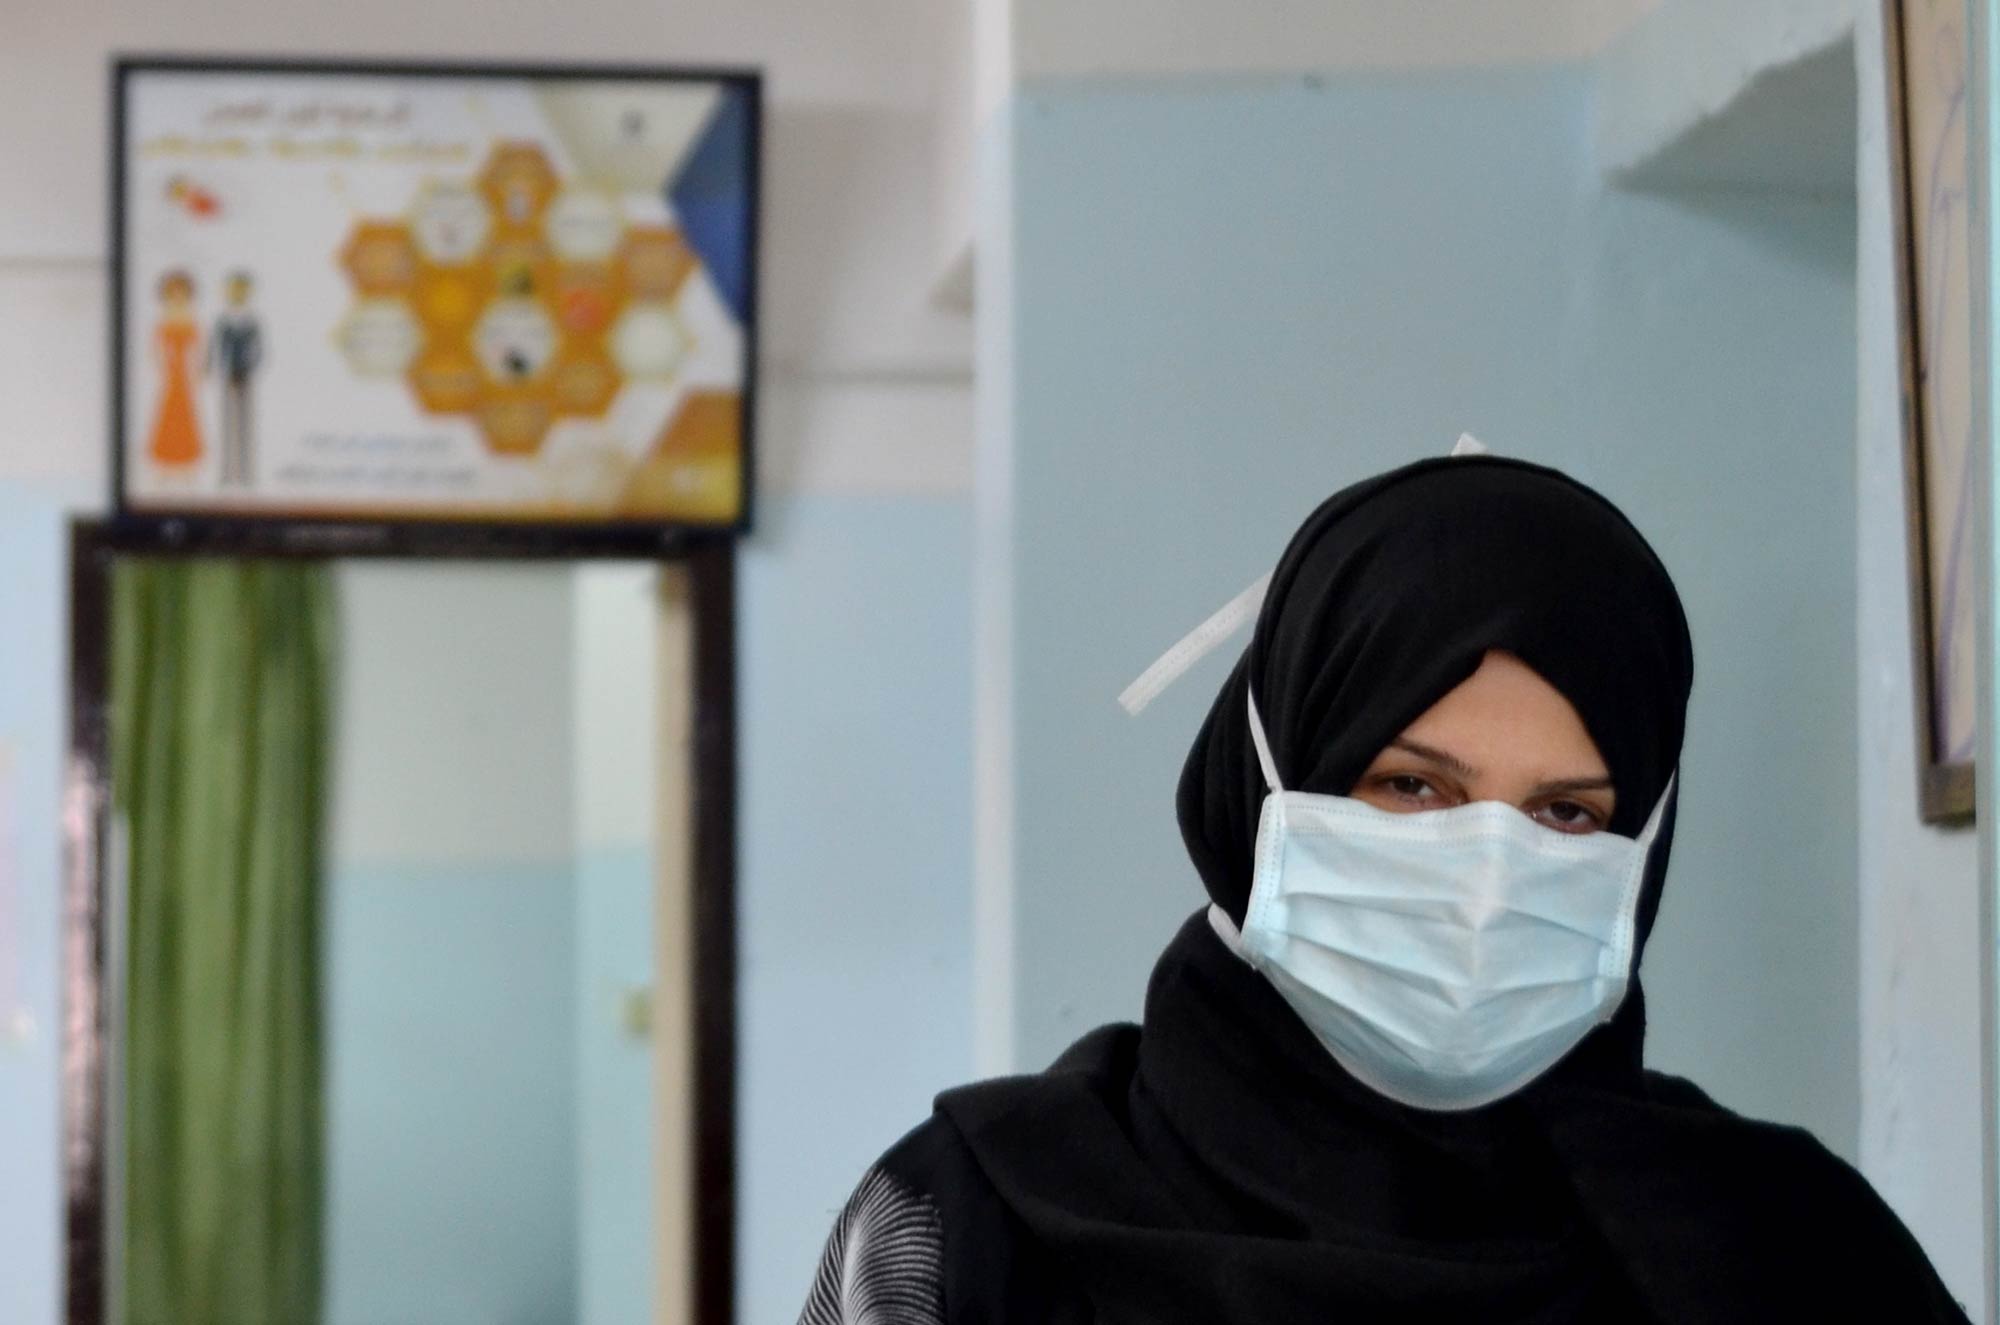 Samah, wearing a mask as a precaution due to the pandemic, at the Women's Health Center in Bureij to treat an infection.